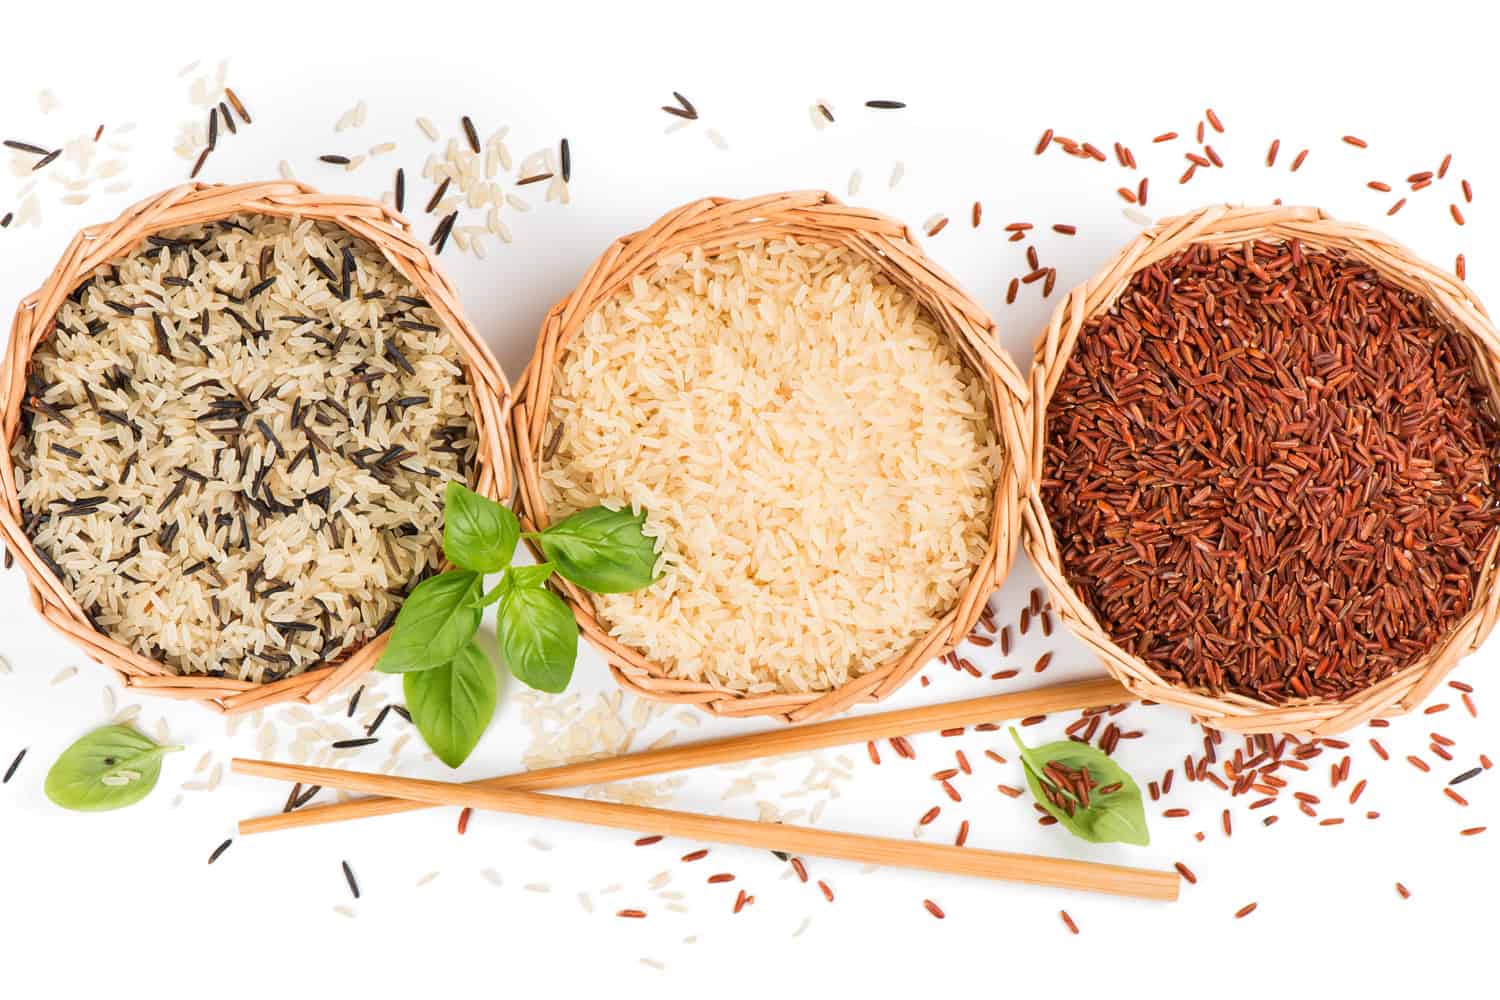 Top view of different rice types in a baskets decorated with basil and chopsticks isolated on white background